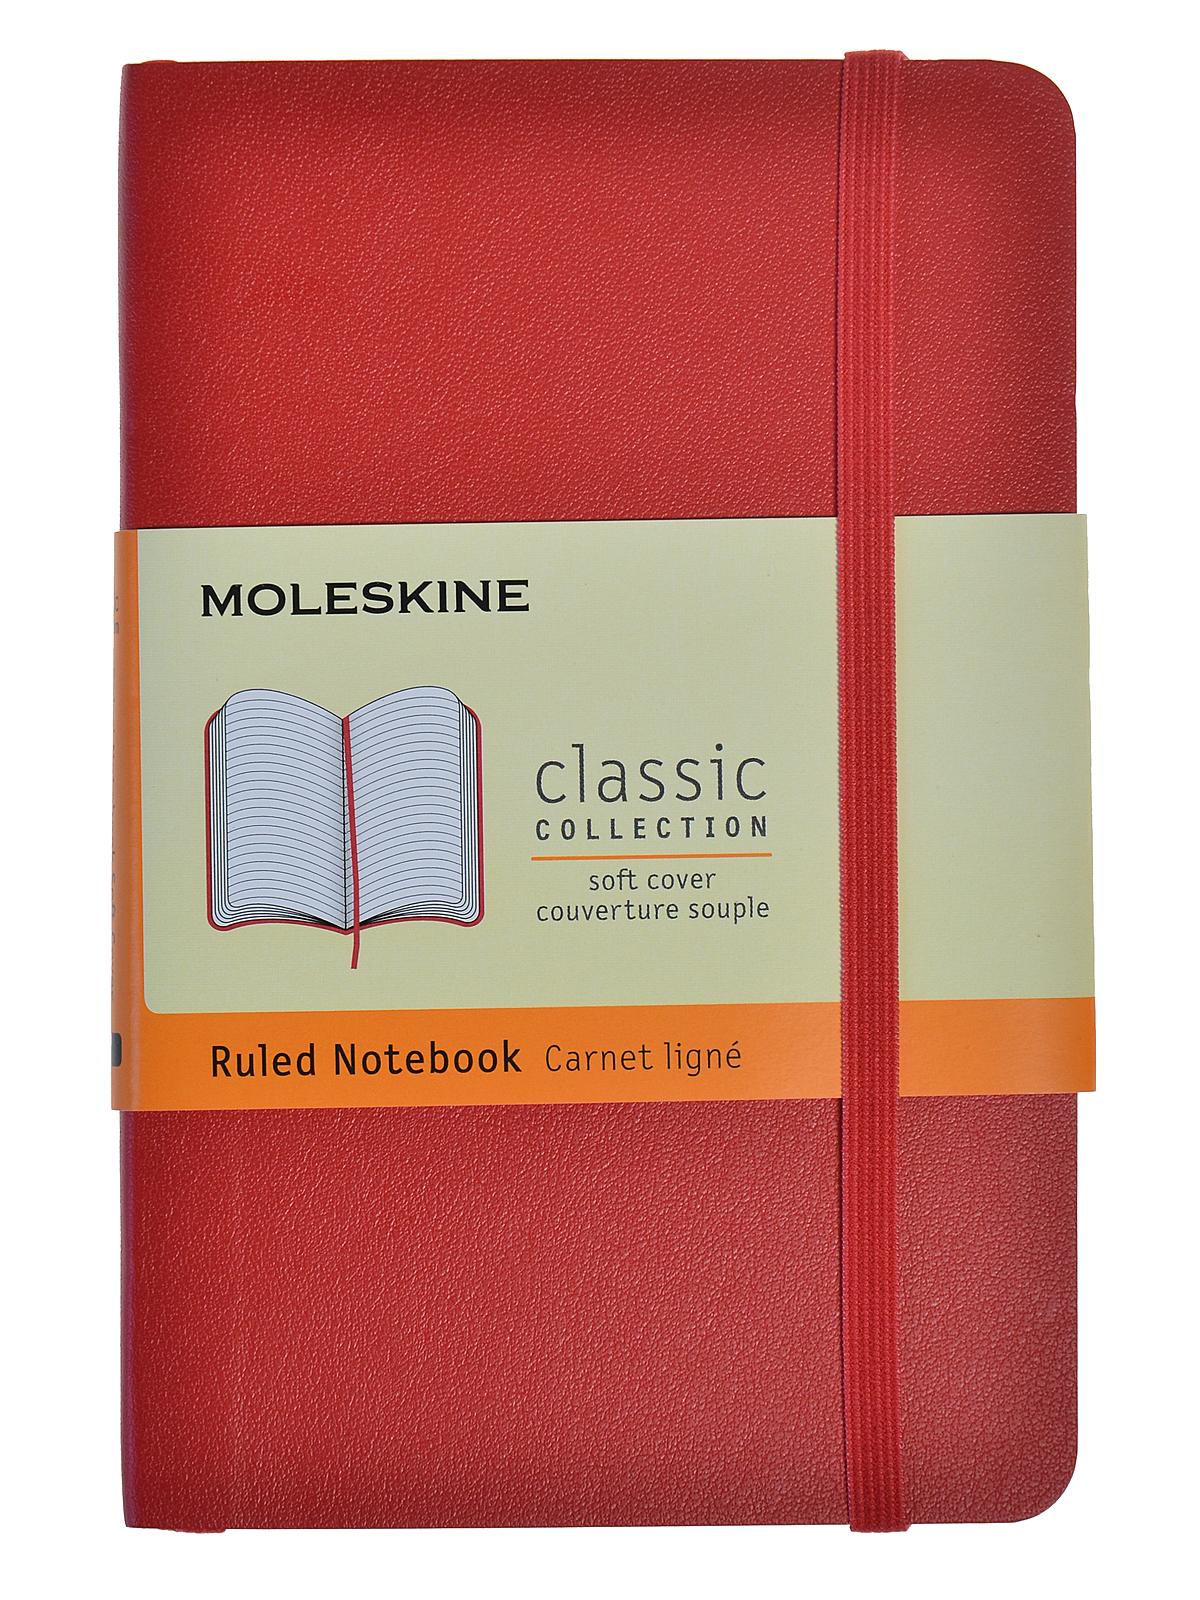 Classic Soft Cover Notebooks Red 3 1 2 In. X 5 1 2 In. 192 Pages, Lined